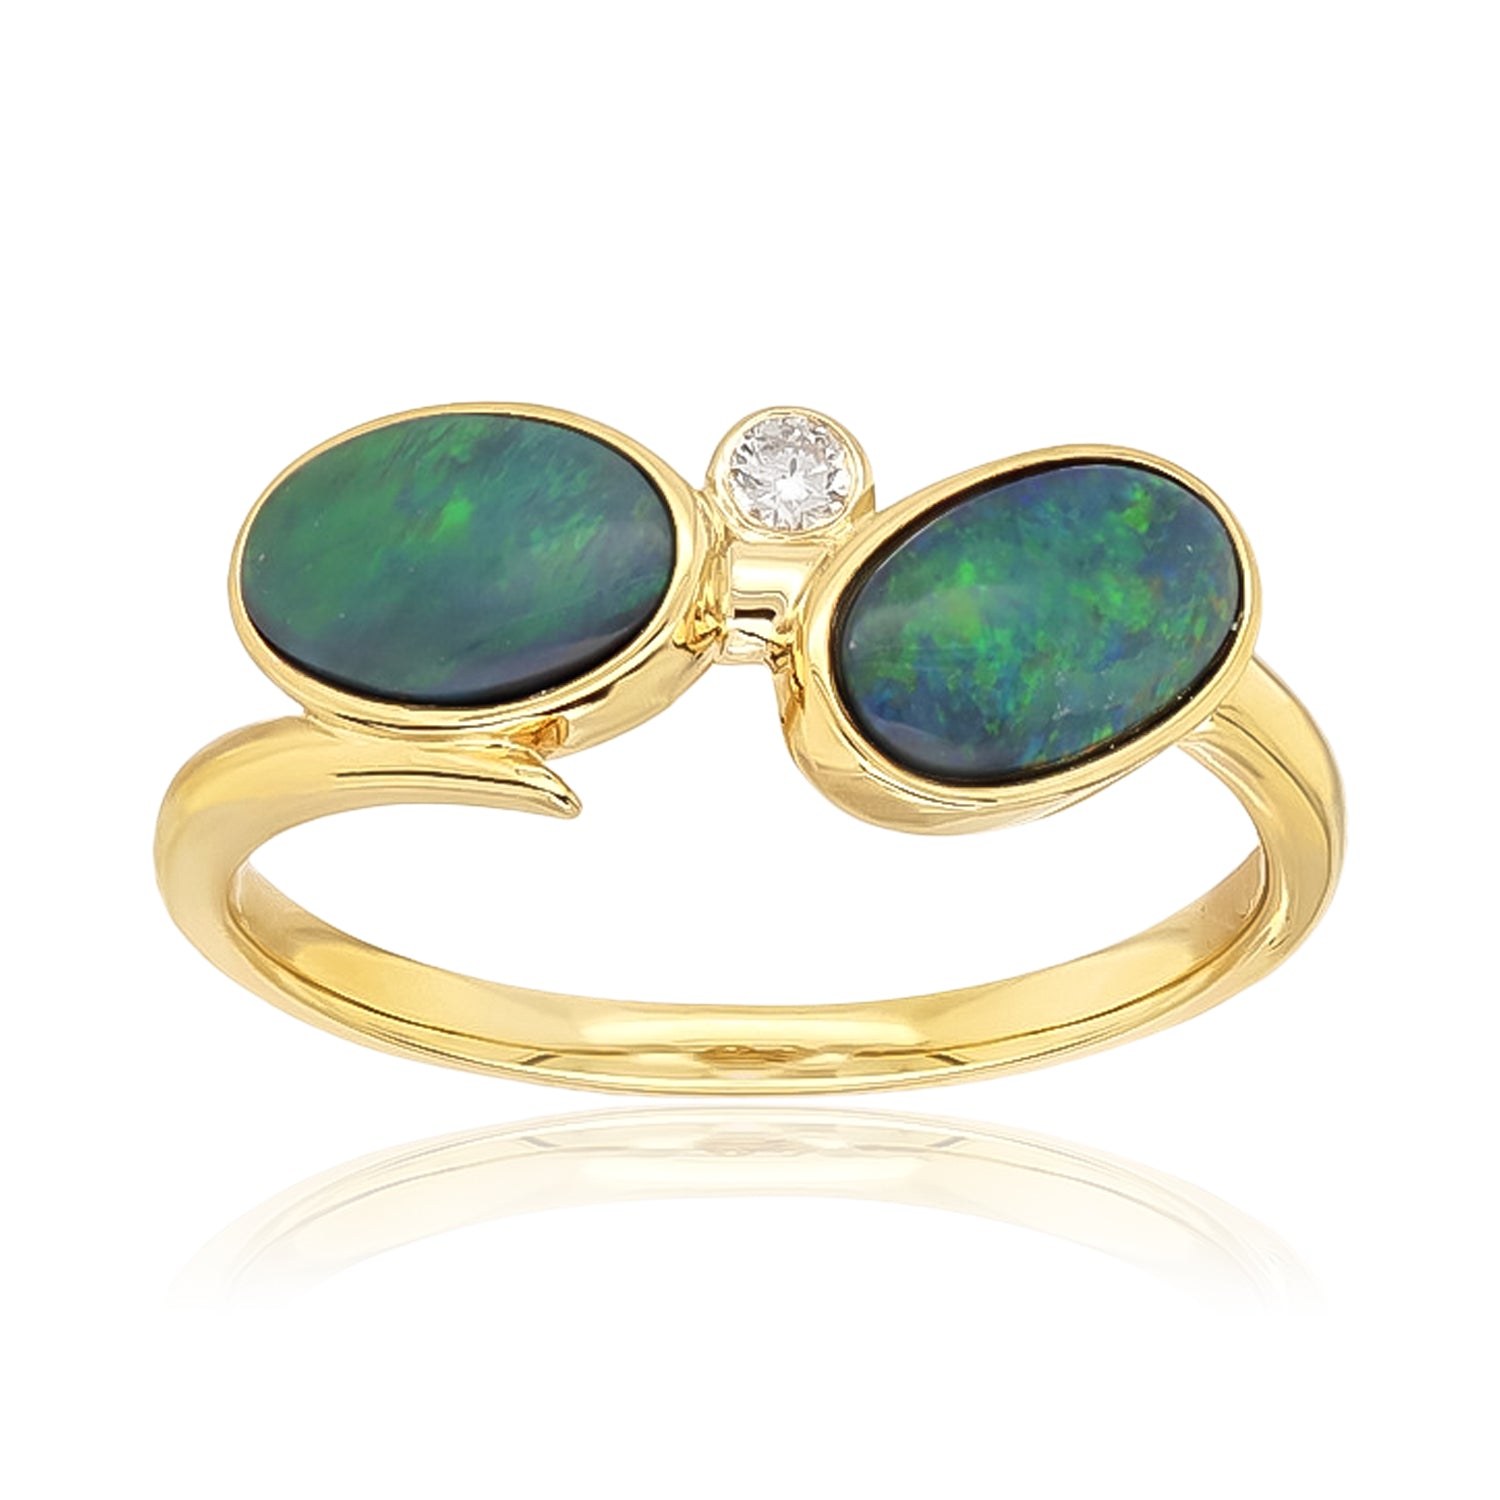 Heirloom emerald ring with opal and sapphires - Anpé Atelier CPH